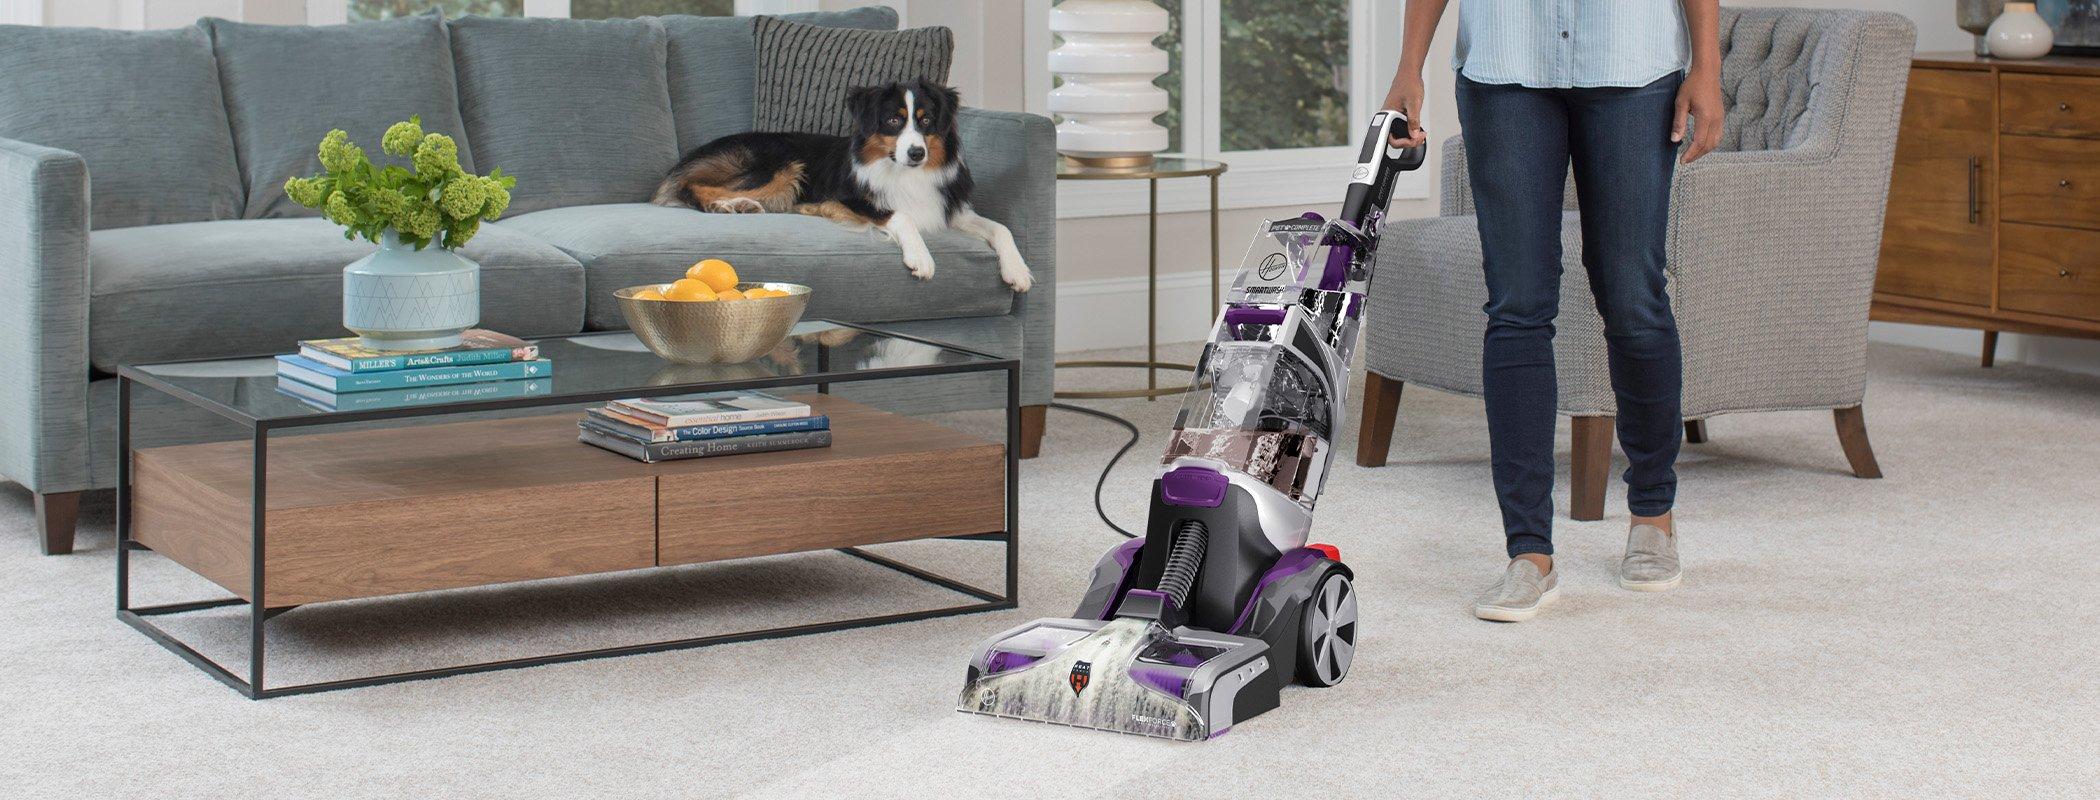 HOOVER SmartWash Pet Complete Automatic Carpet Cleaner Machine with  Removeable Stain Pretreat Wand FH53000 - The Home Depot